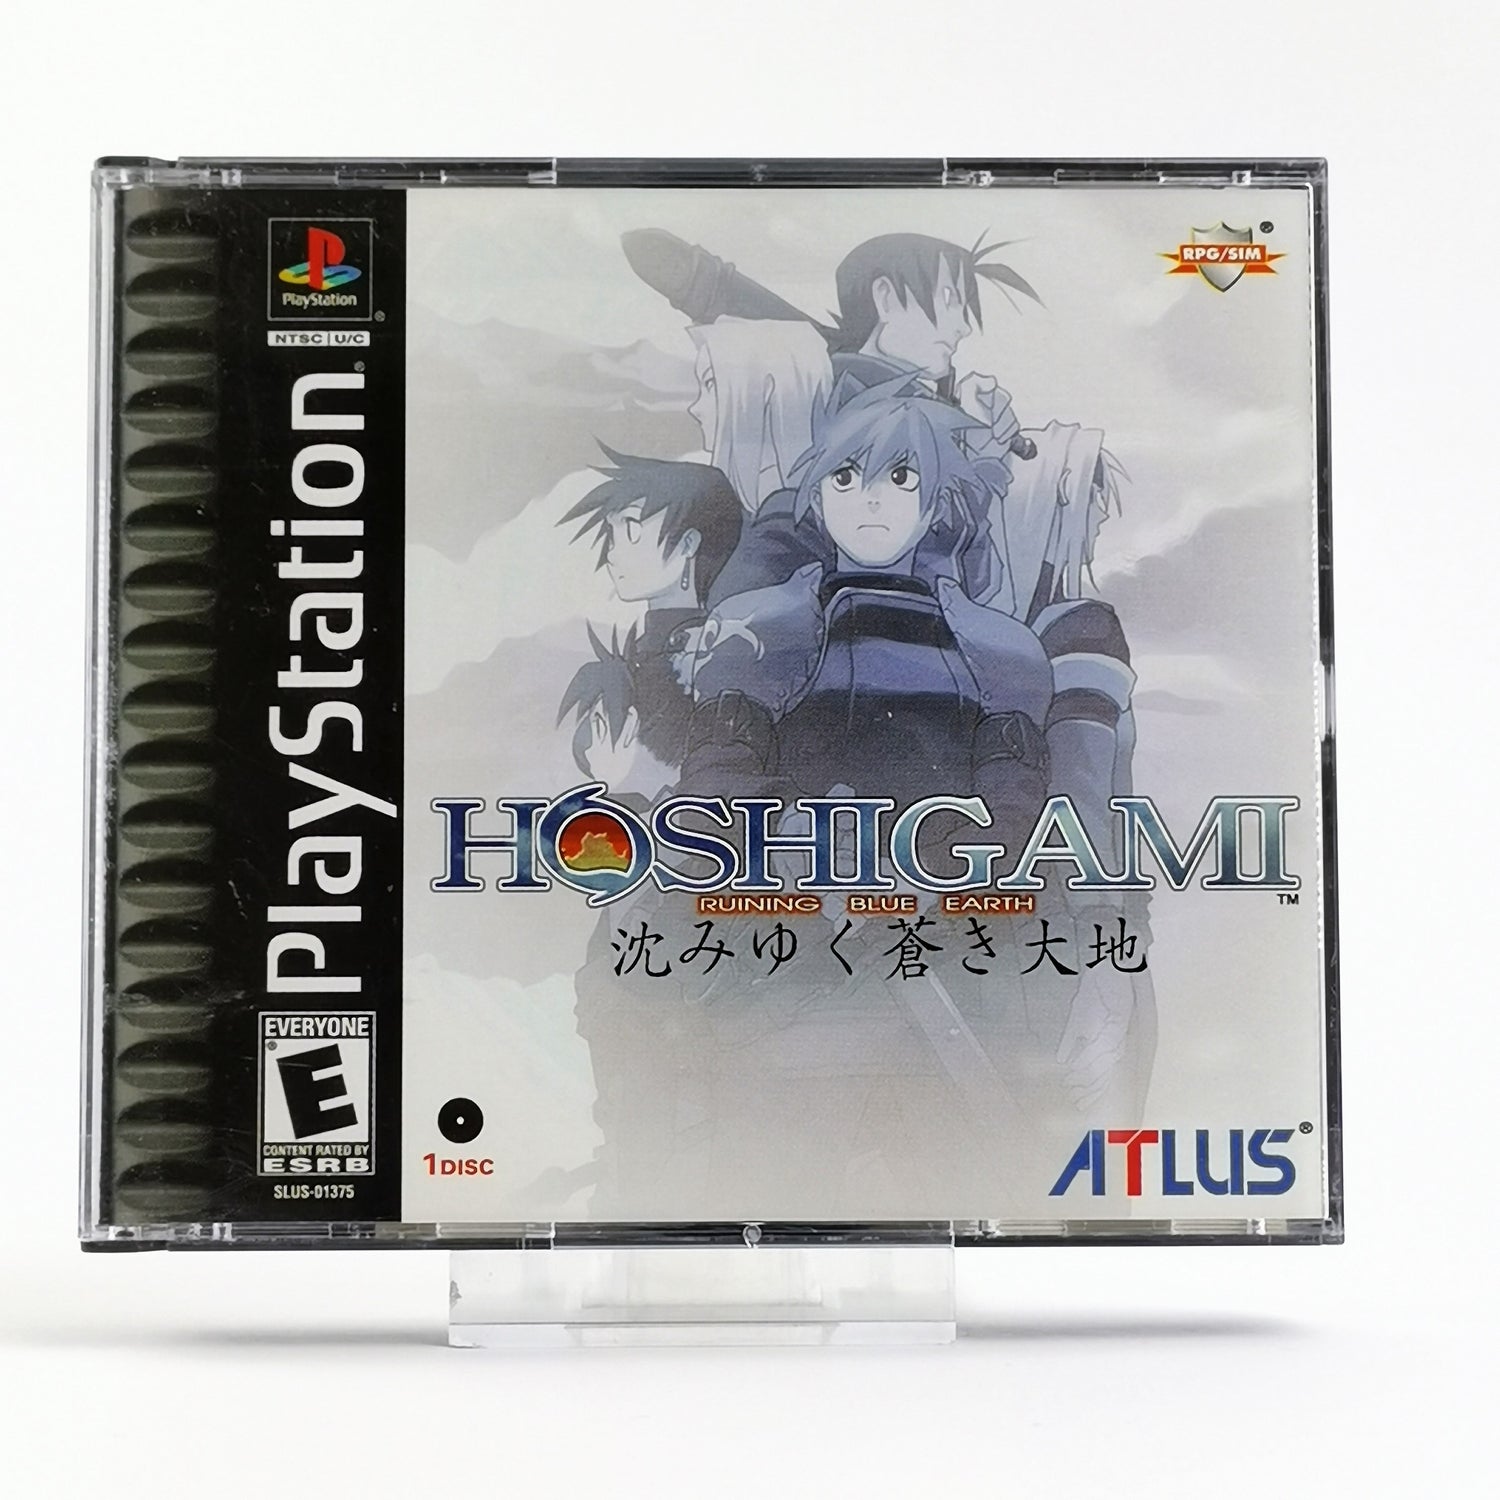 Sony Playstation 1 Game: Hoshigami Ruining Blue Earth - OVP Instructions USA PS1